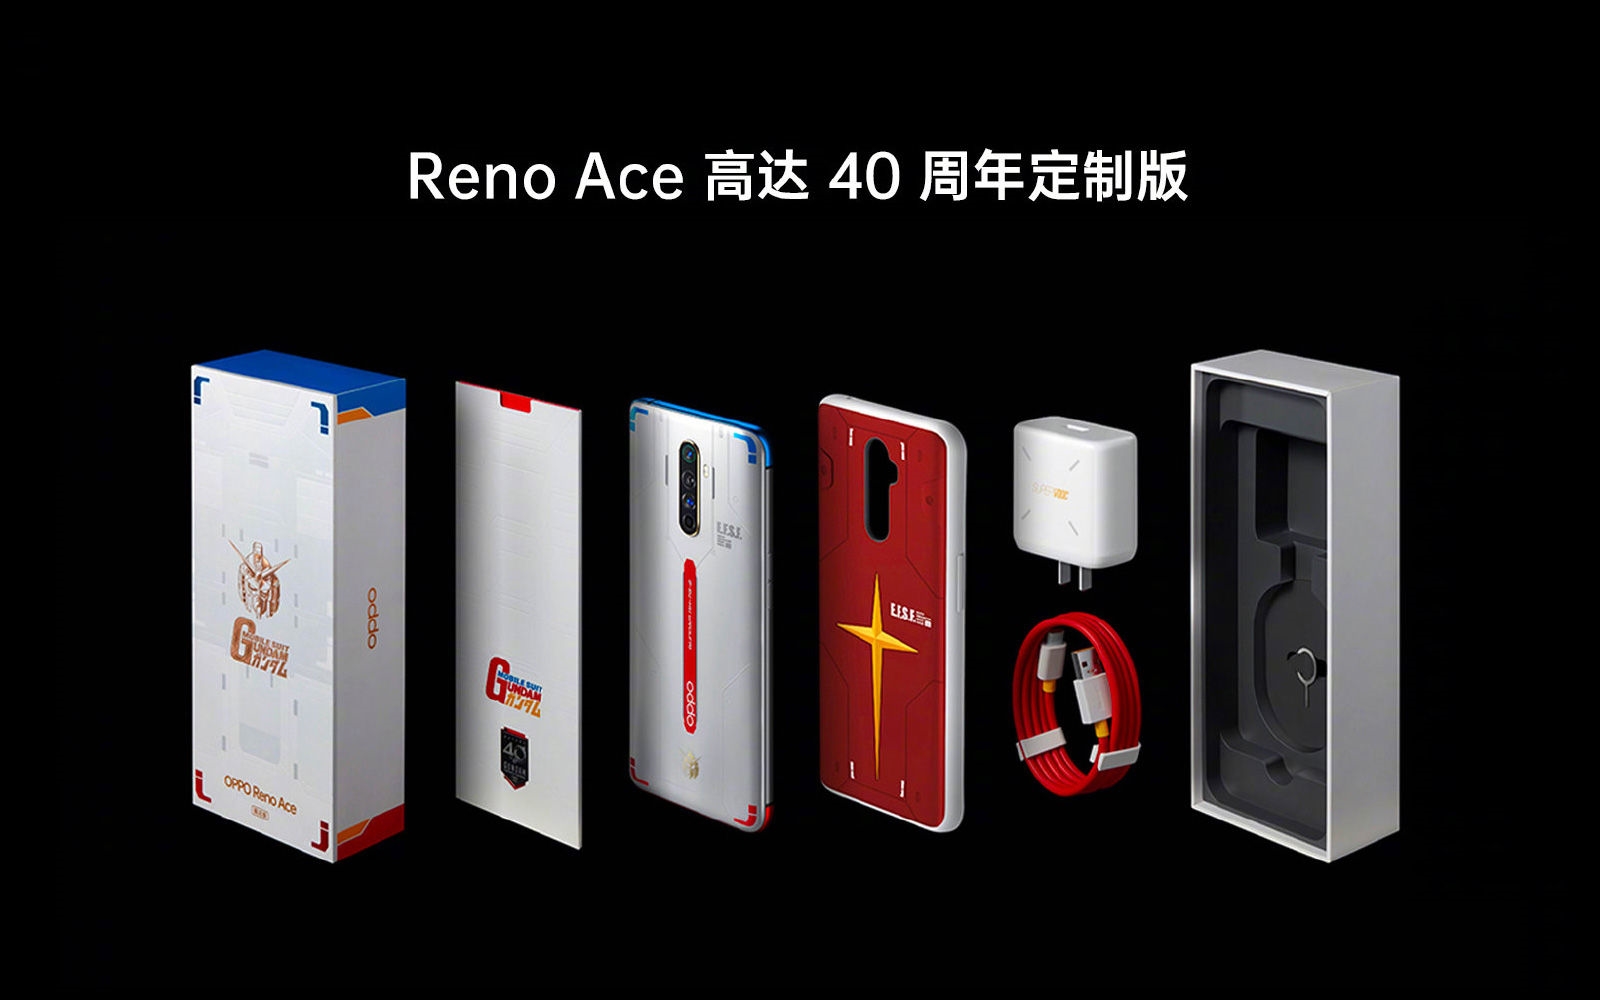 Oppo made a Gundam edition of its fast-charging Reno Ace phone | DeviceDaily.com